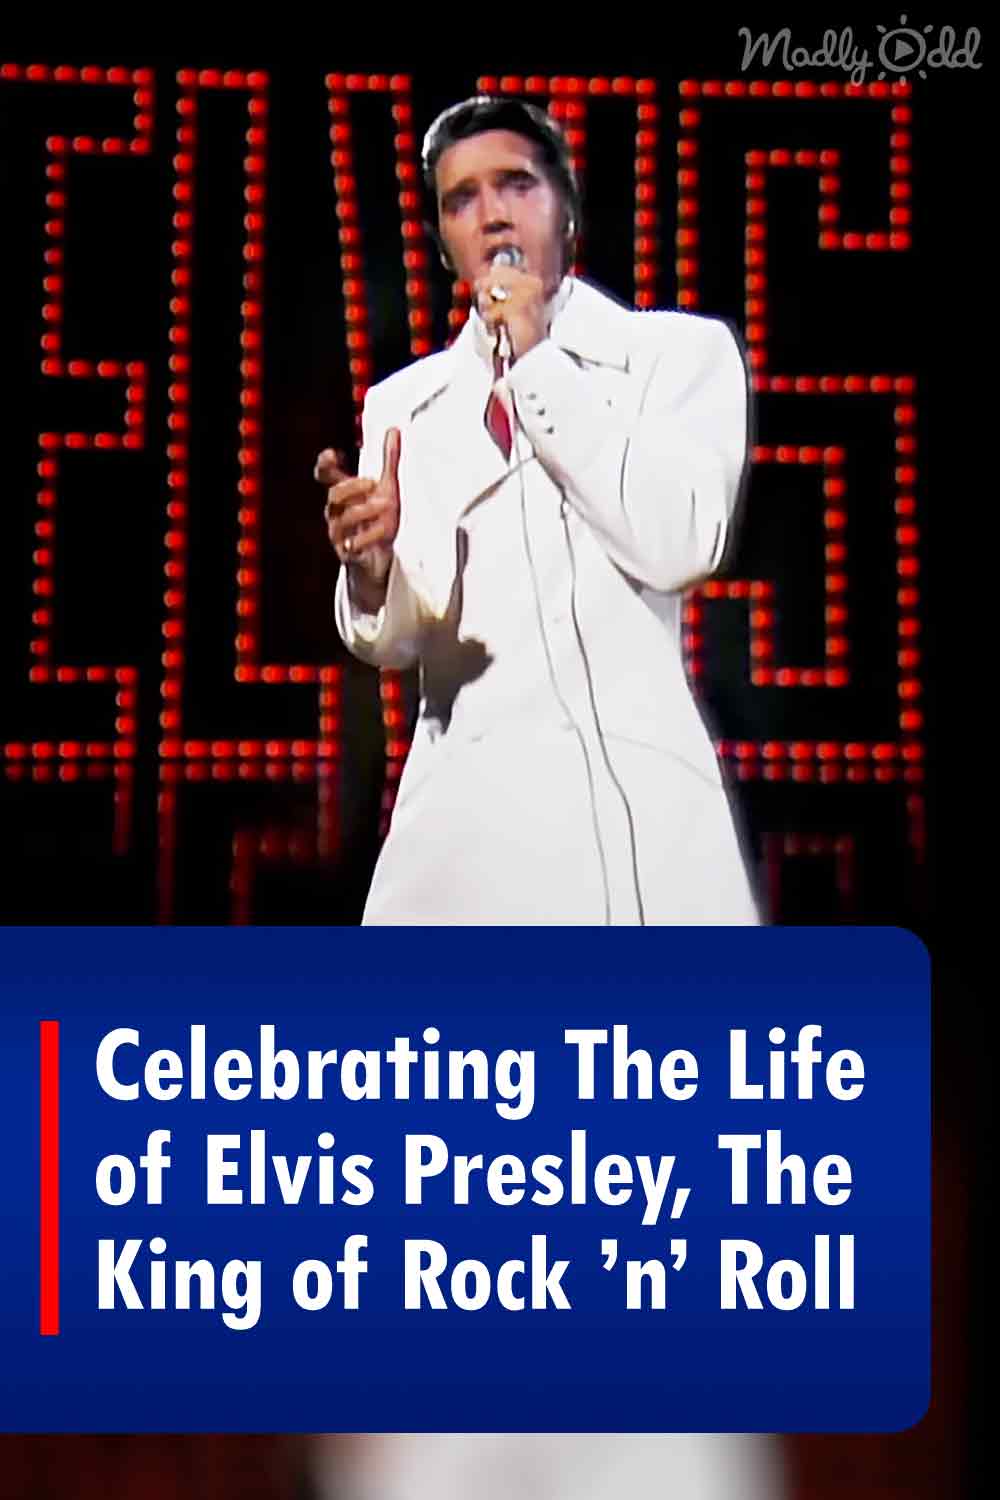 Celebrating The Life of Elvis Presley, The King of Rock ’n’ Roll